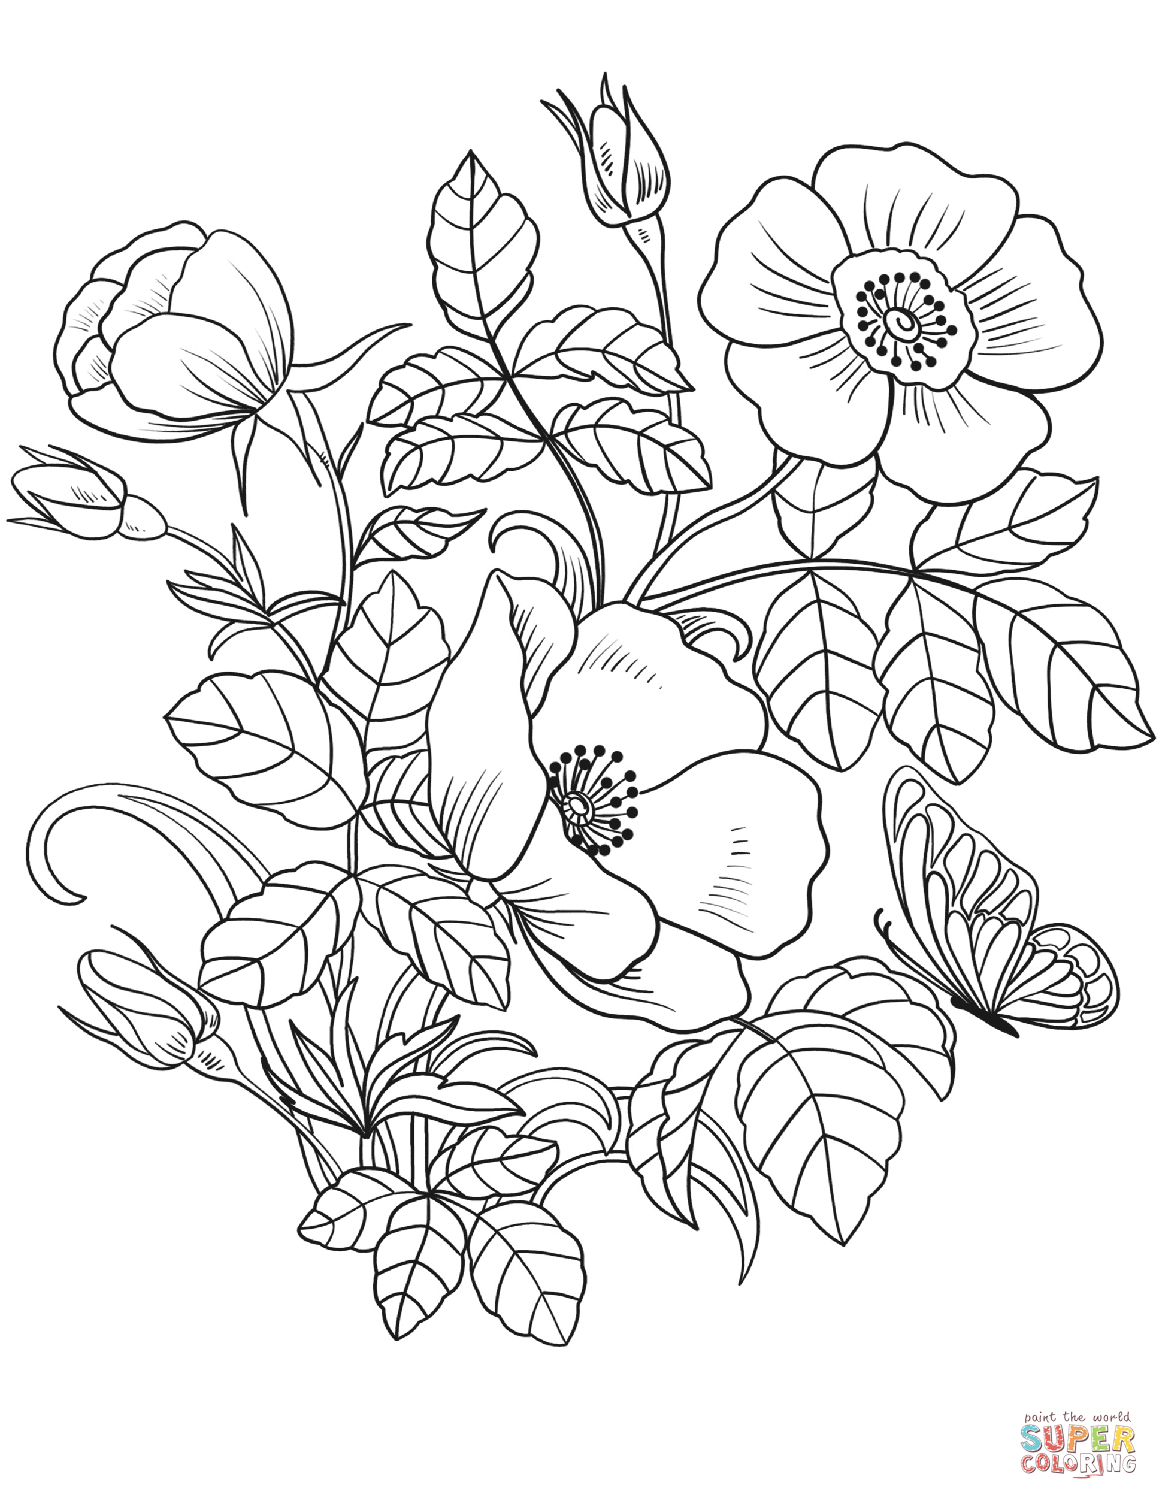 Spring Flowers Coloring Page | Free Printable Coloring Pages - Free Printable Spring Pictures To Color